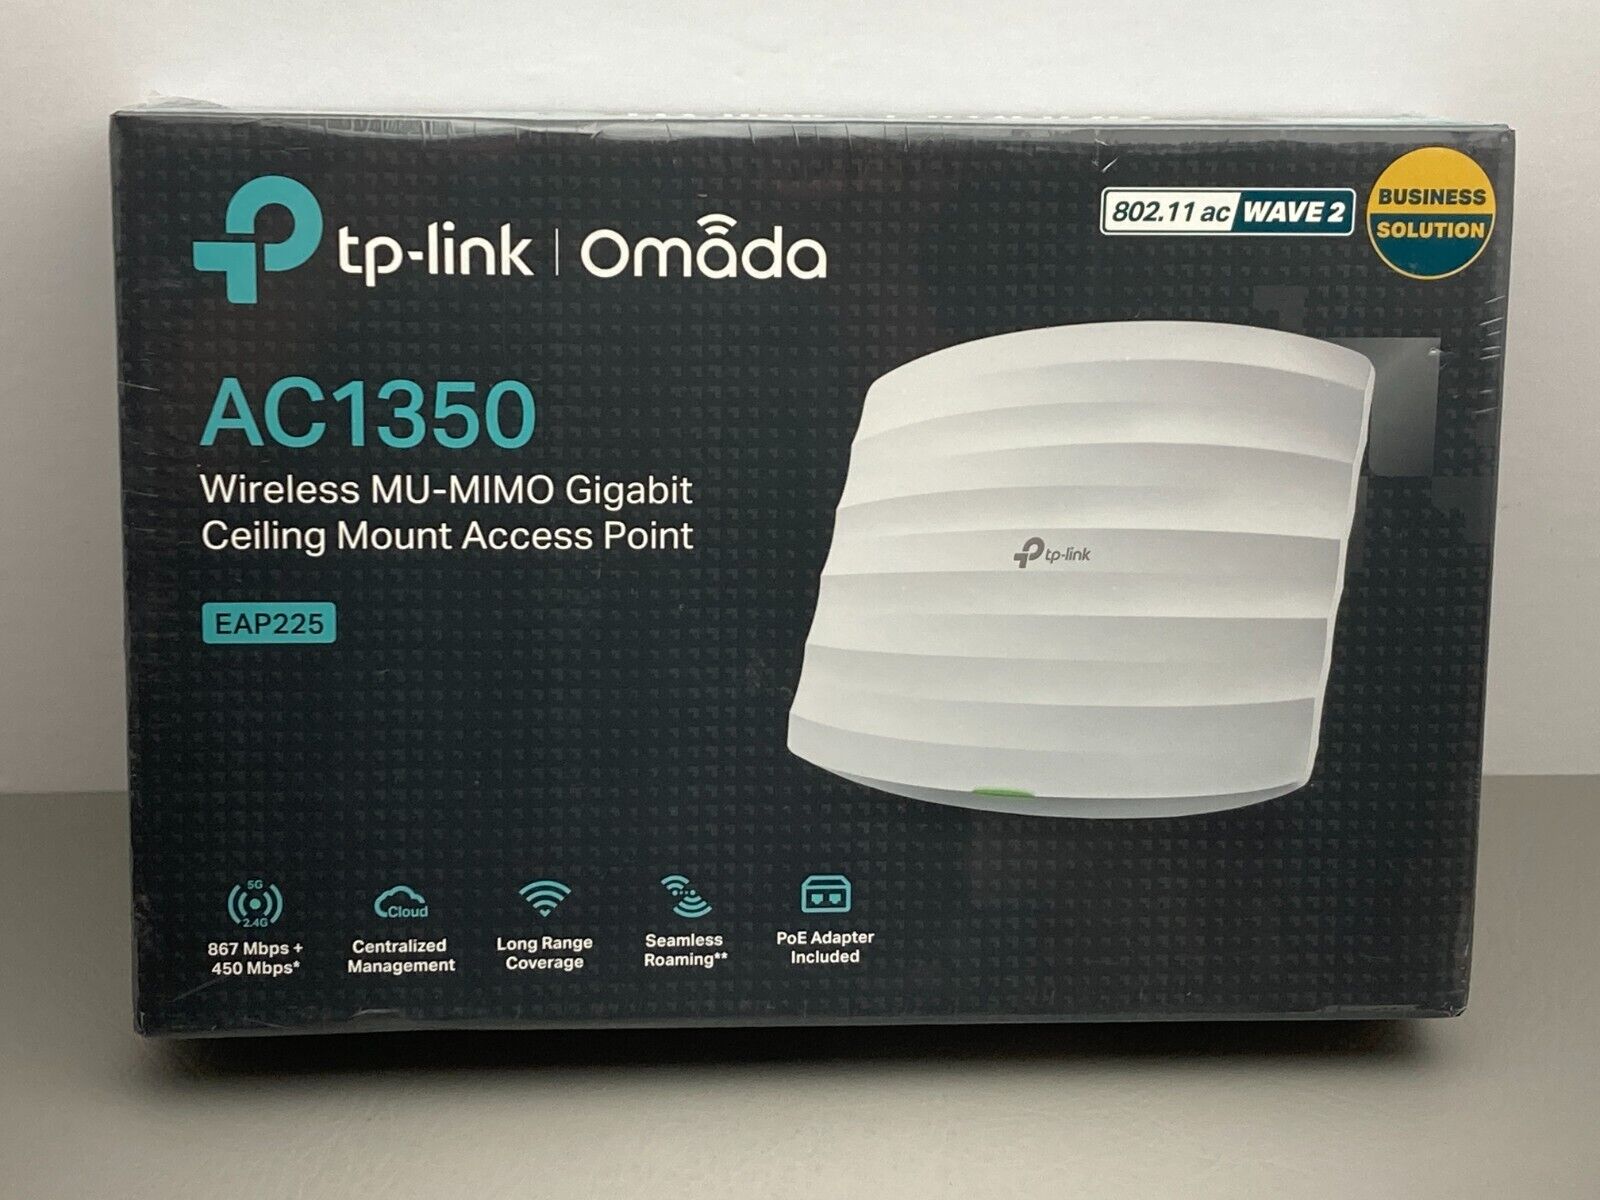 TP-Link Omada AC1350 Wireless MU-MIMO Gigabit Ceiling Mount Access Point EAP225